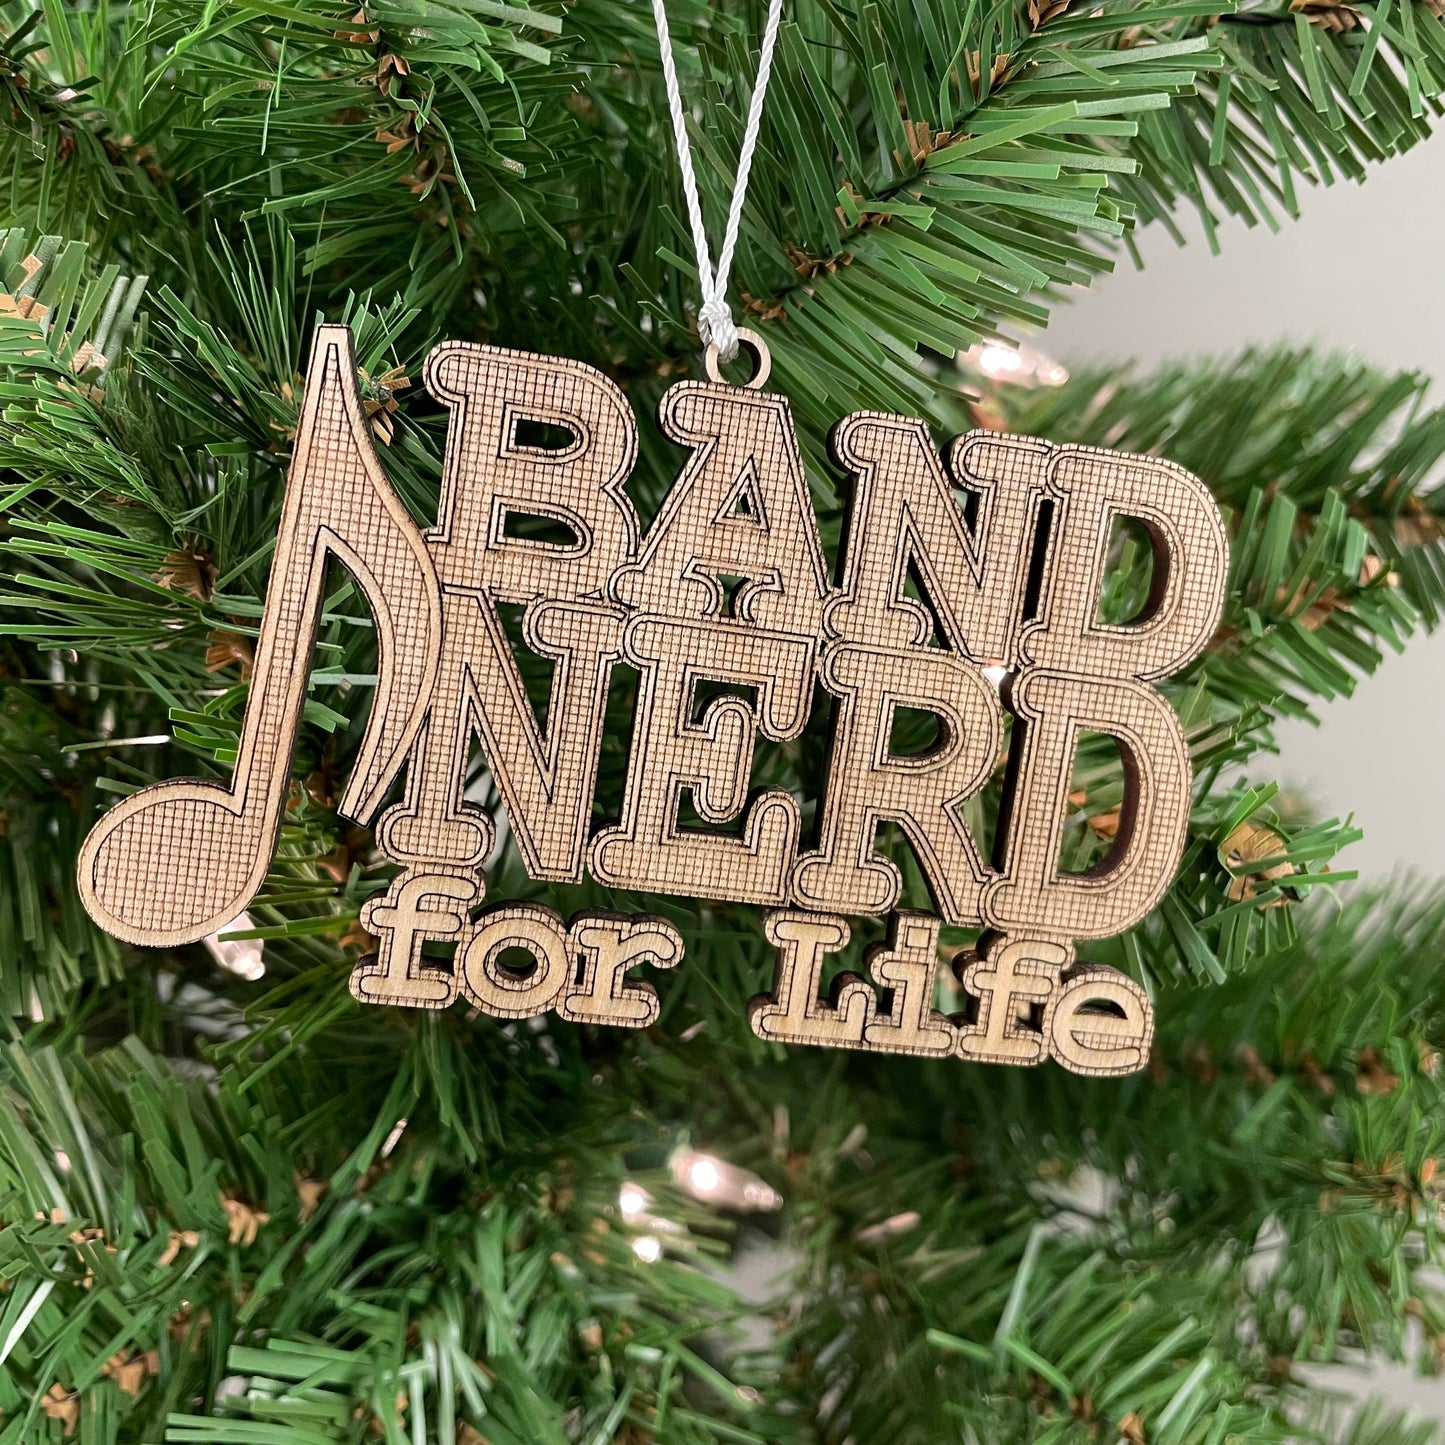 Band Nerd For Life Engraved Wood Ornament